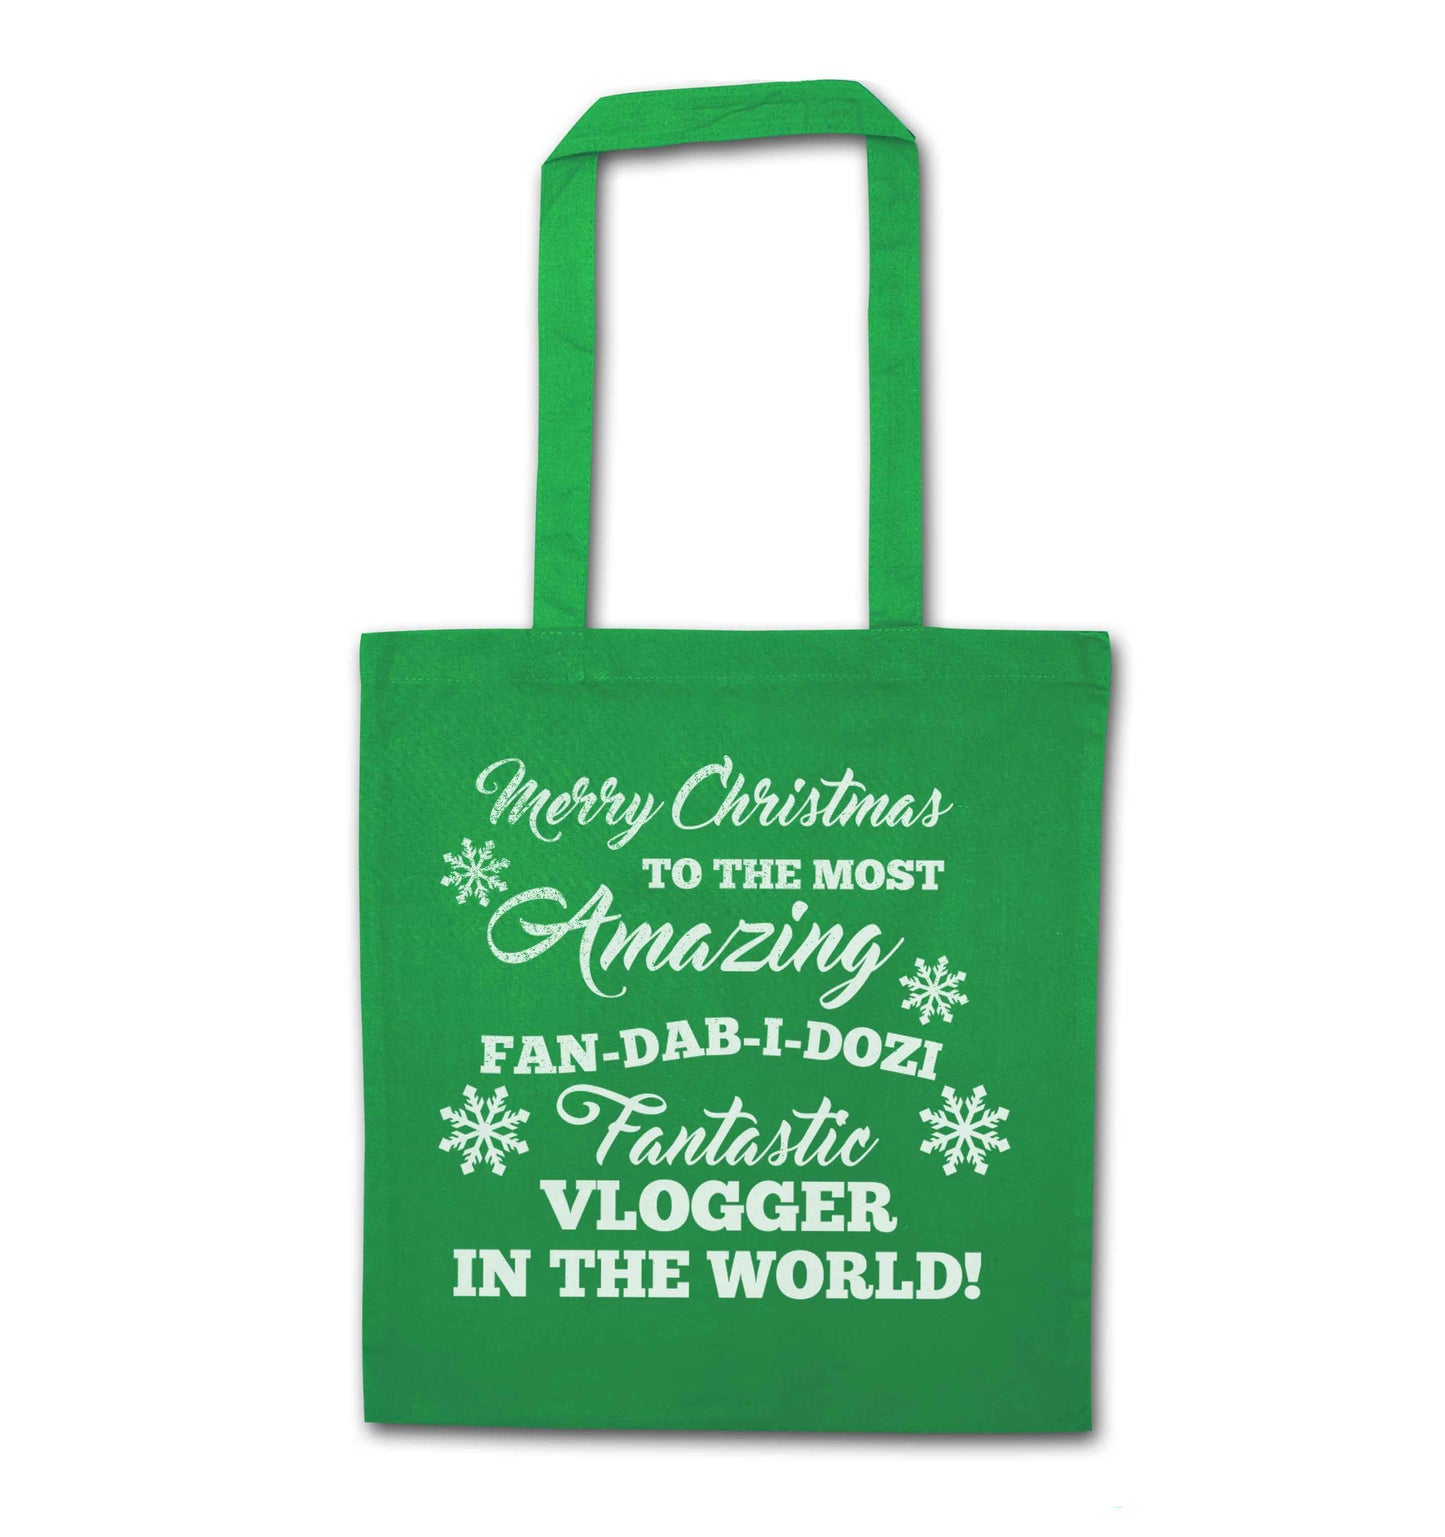 Merry Christmas to the most amazing fan-dab-i-dozi fantasic vlogger in the world green tote bag